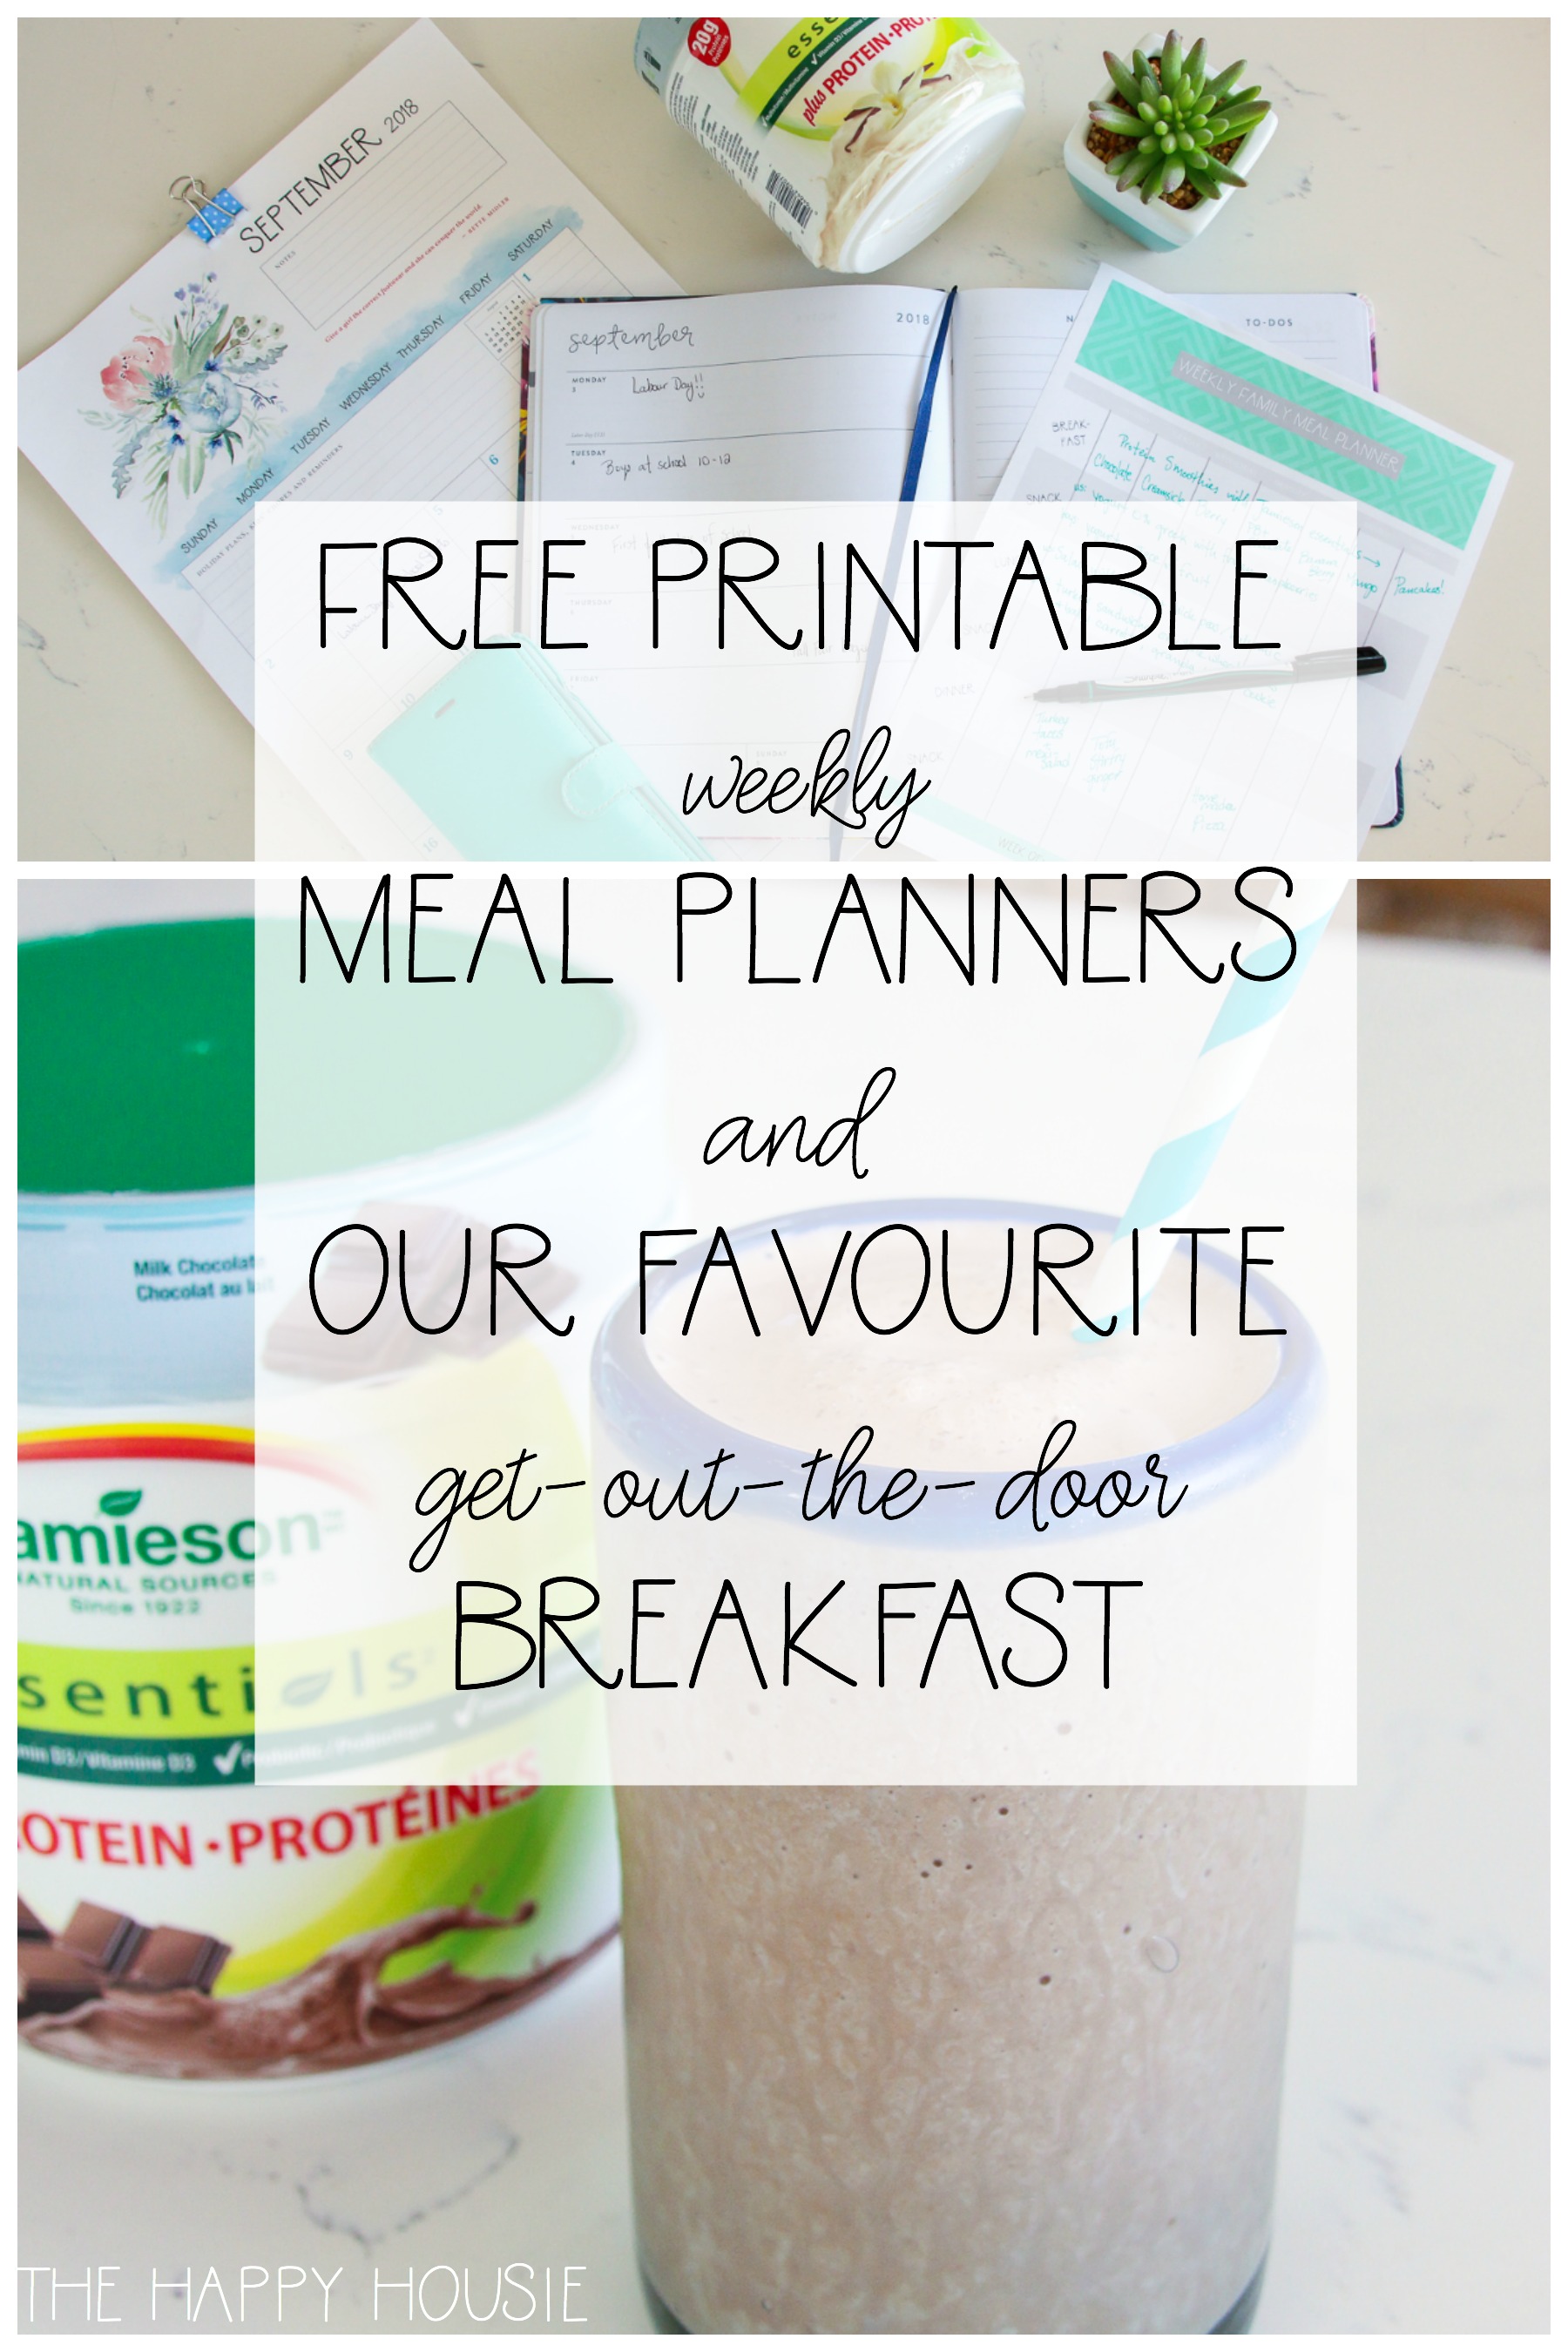 The printable meal planner graphic.